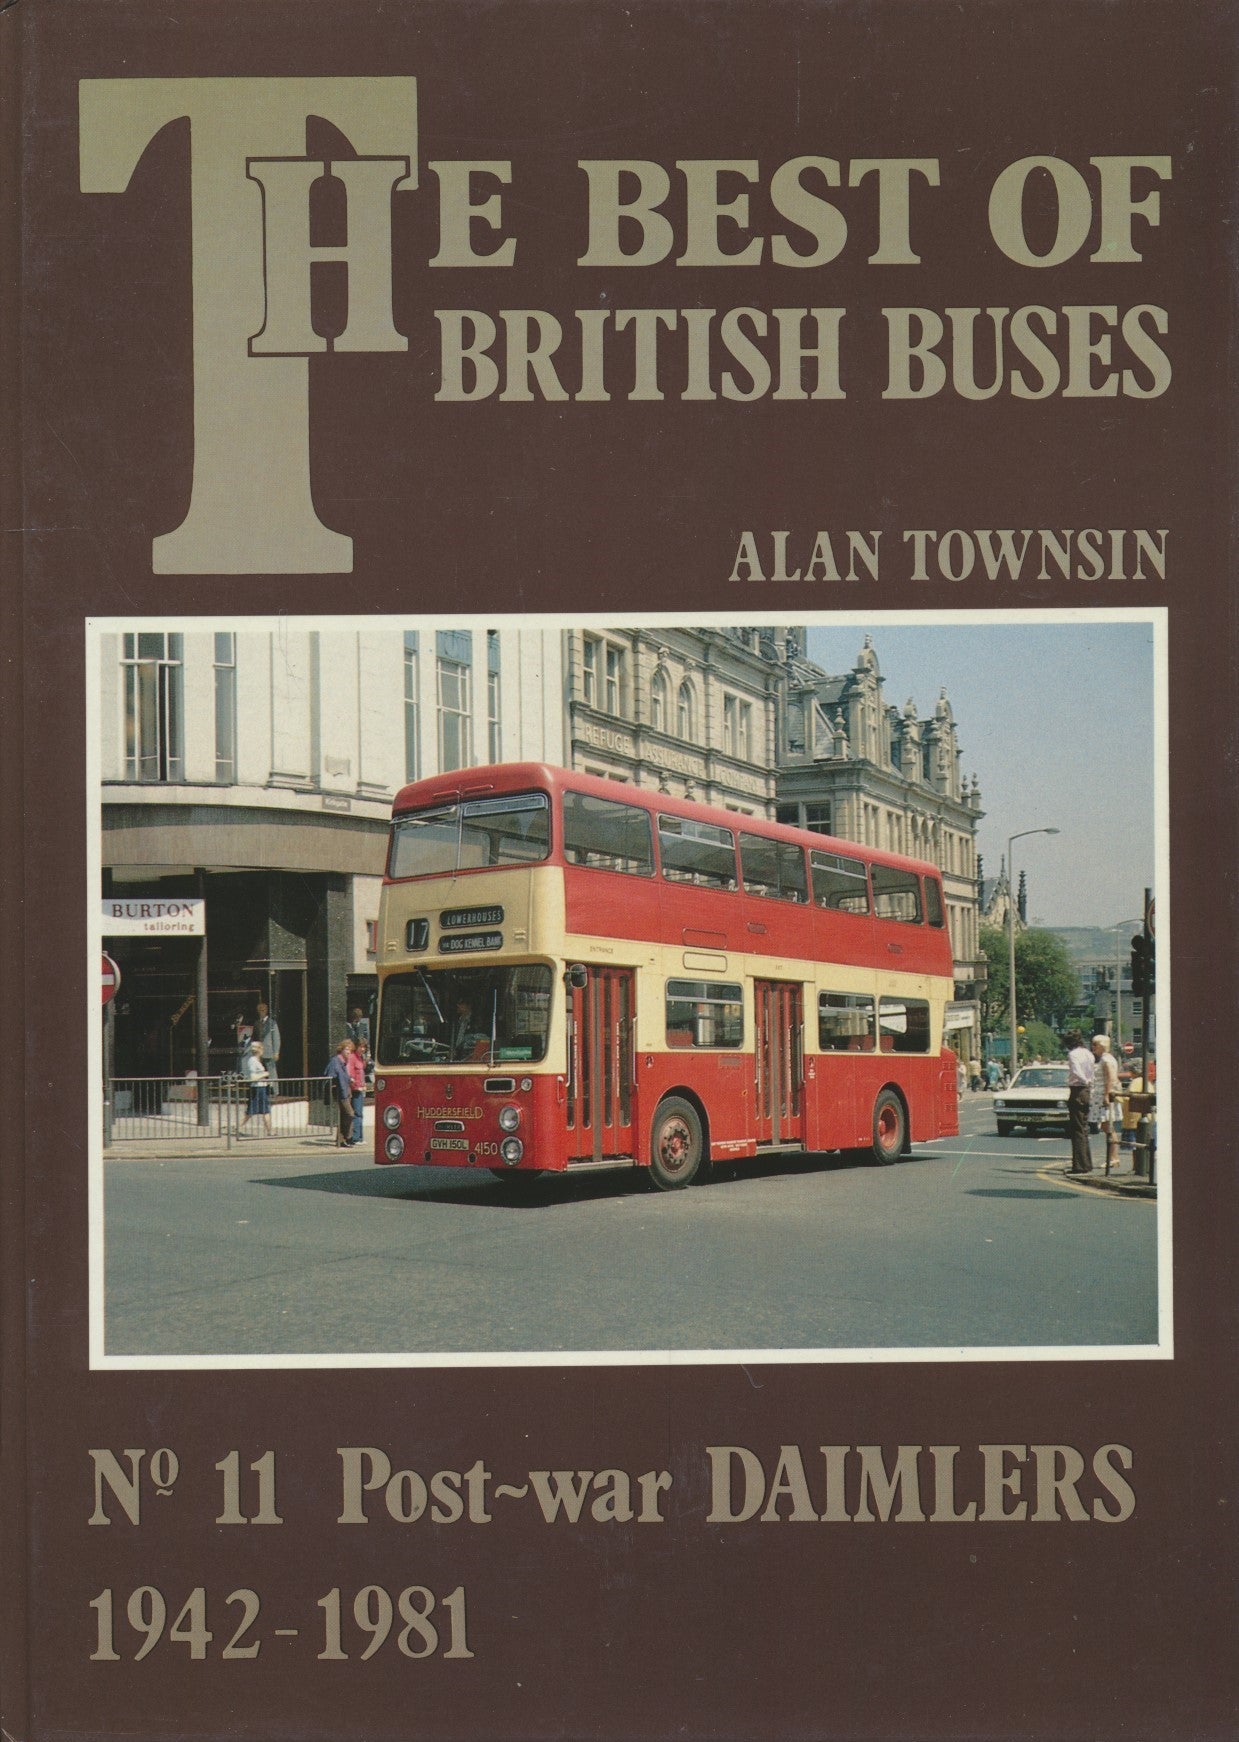 The Best of British Buses: No.11 - Post War Daimlers 1942-1981